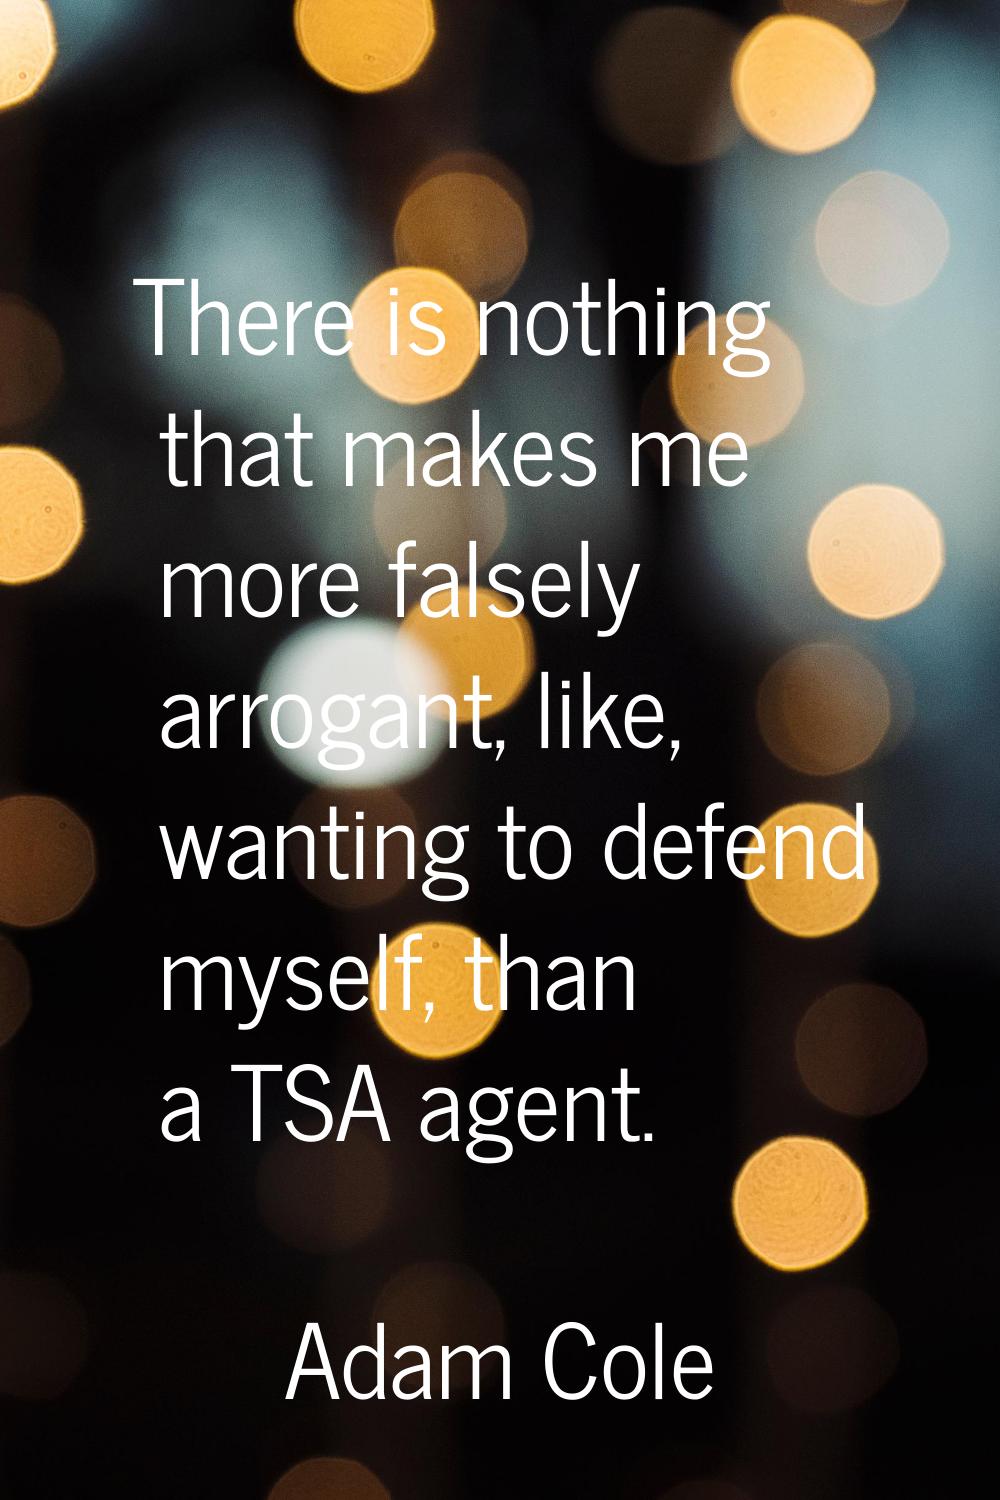 There is nothing that makes me more falsely arrogant, like, wanting to defend myself, than a TSA ag